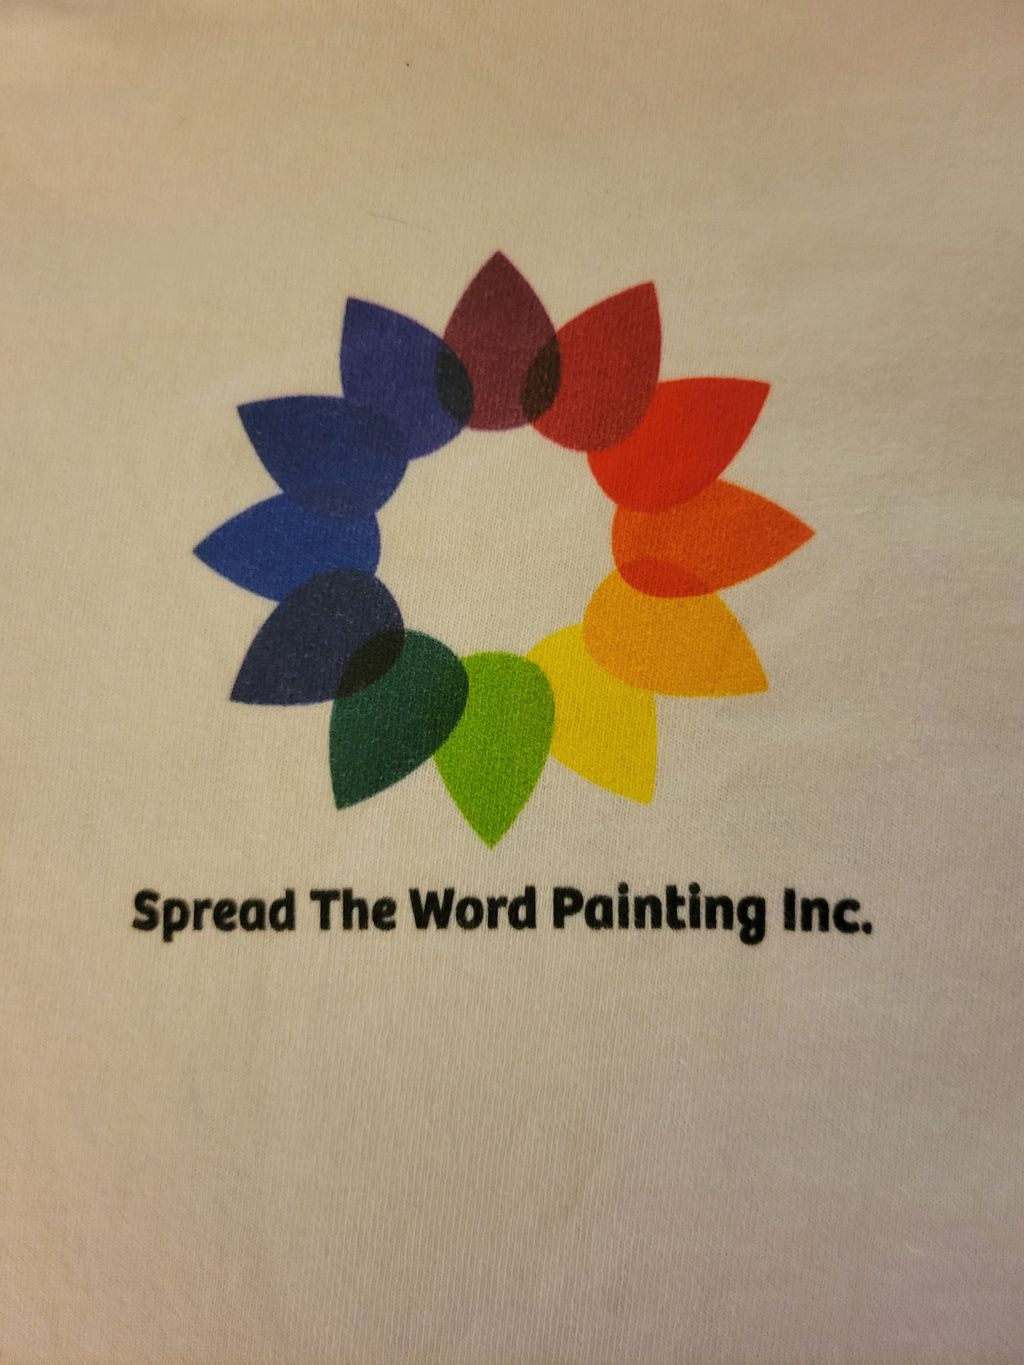 Spread The Word Painting